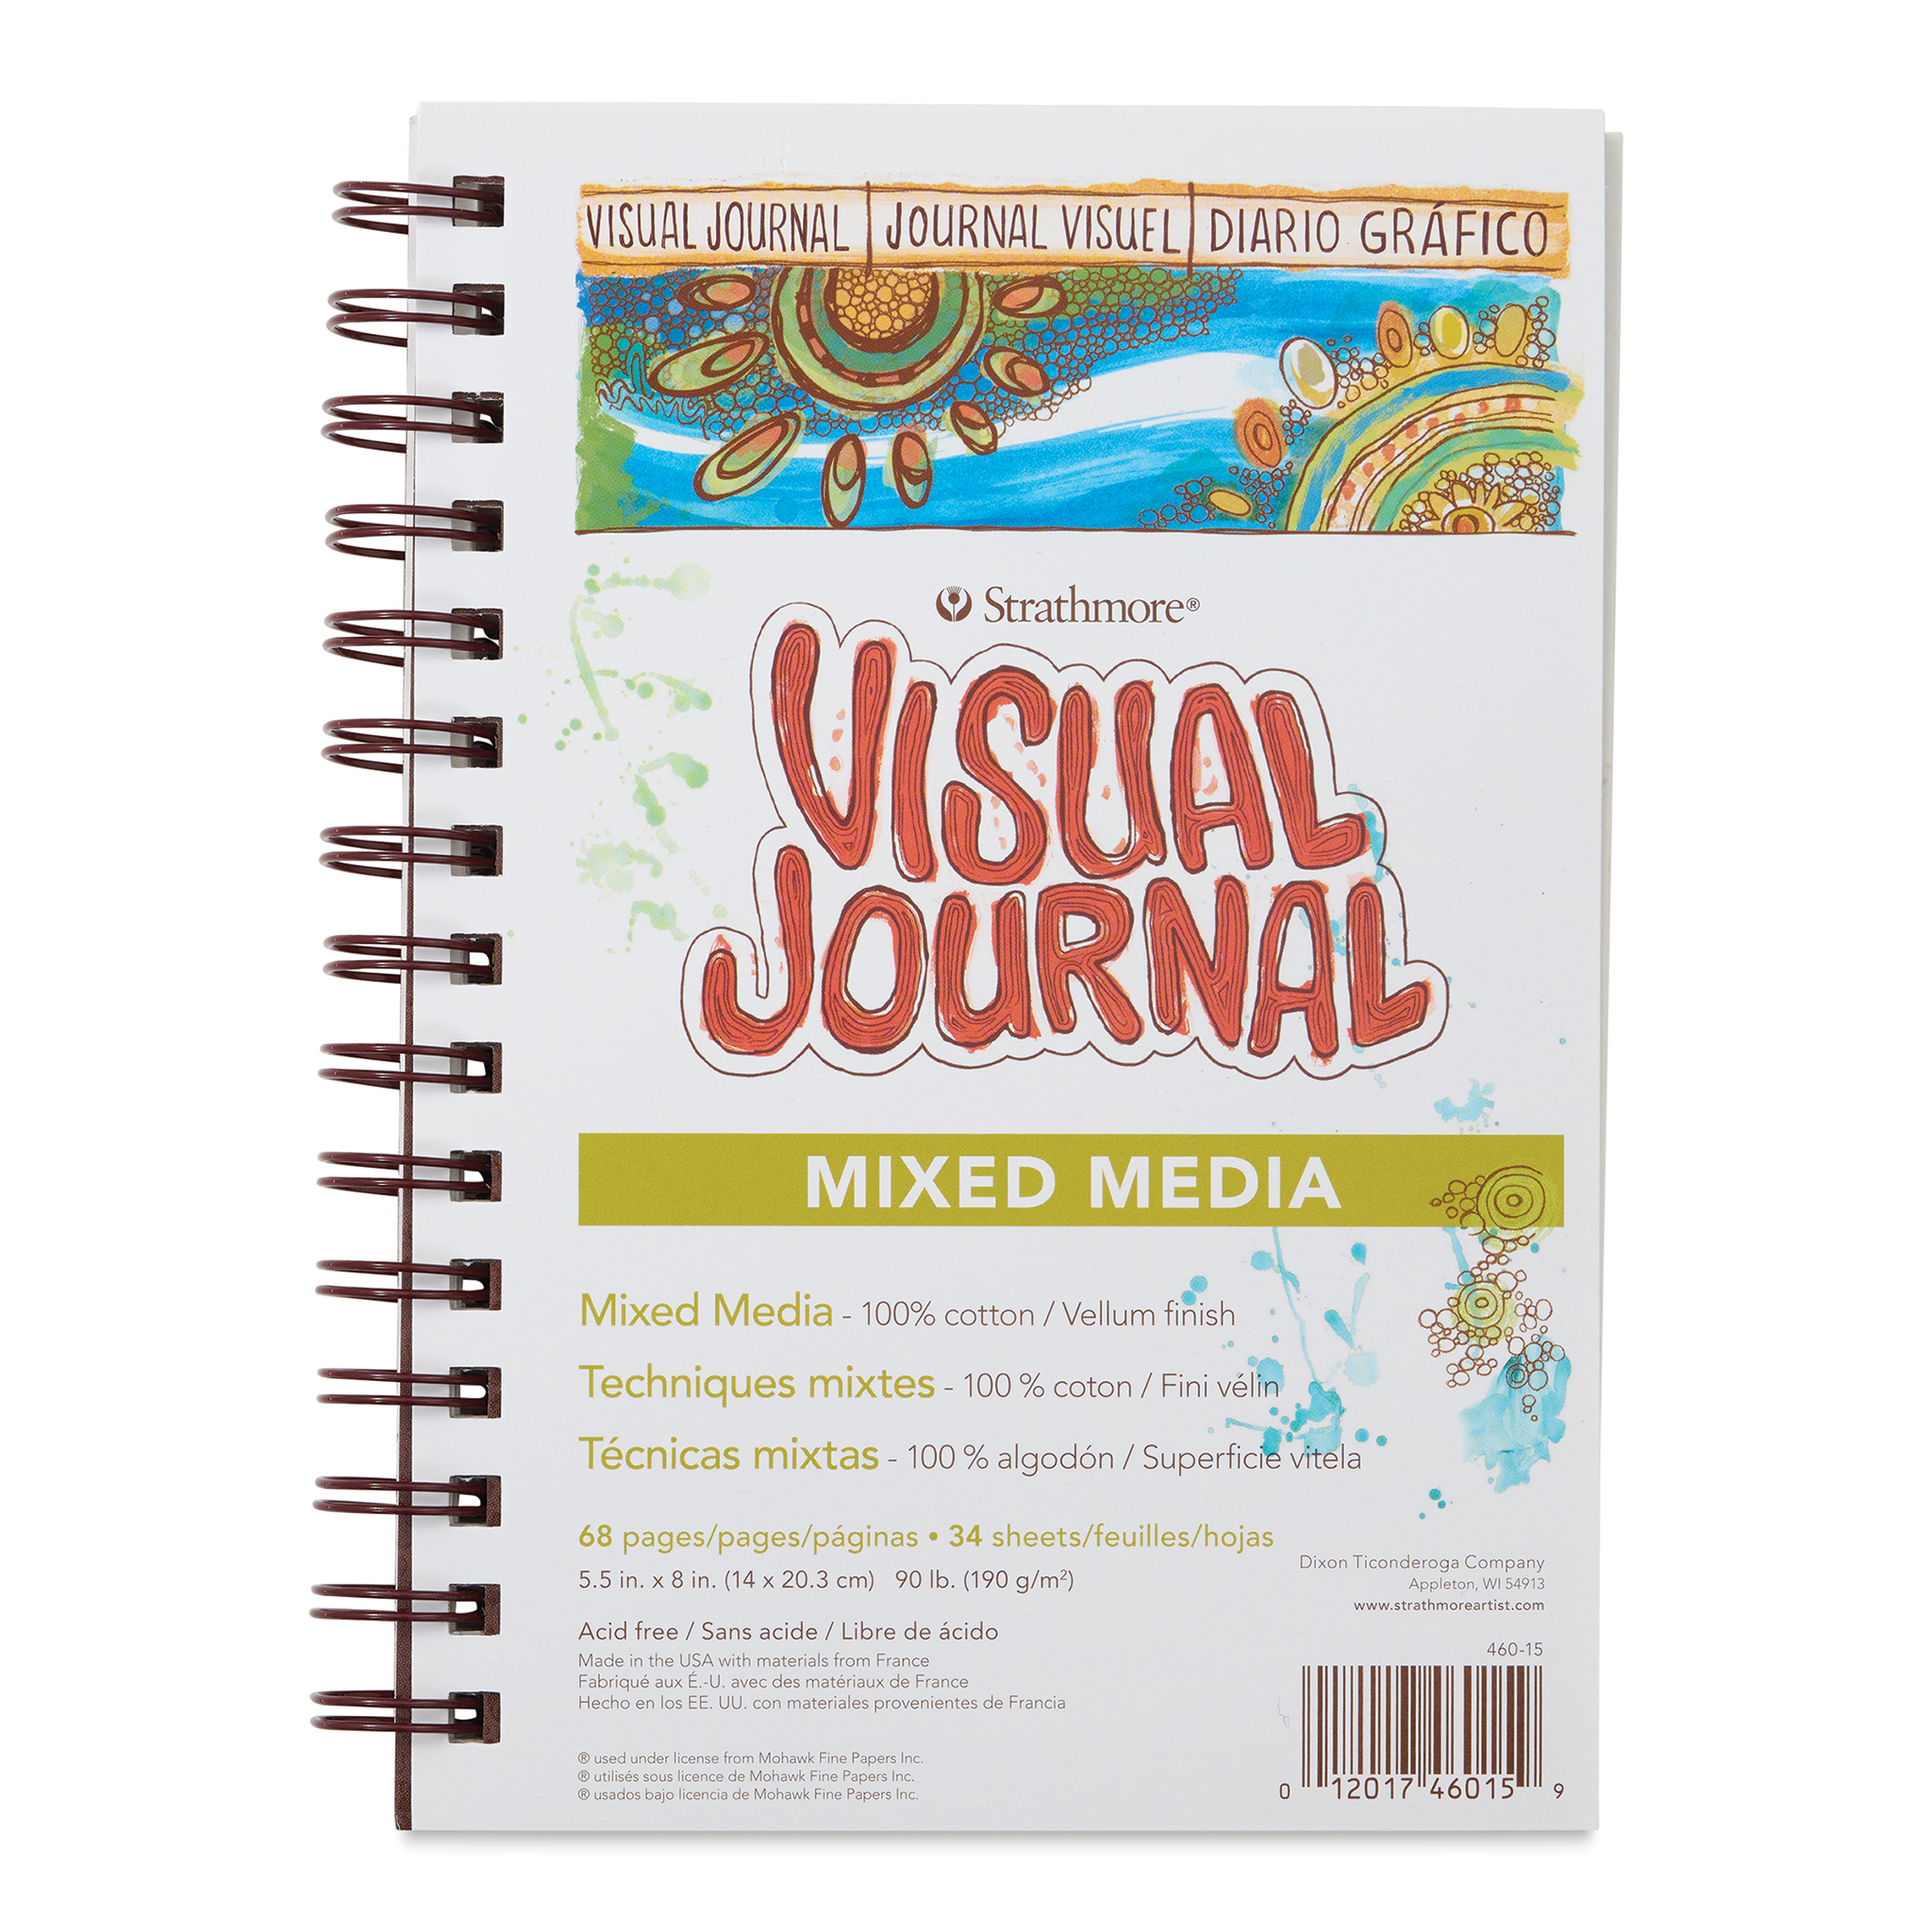 Strathmore Mixed Media Visual Journals